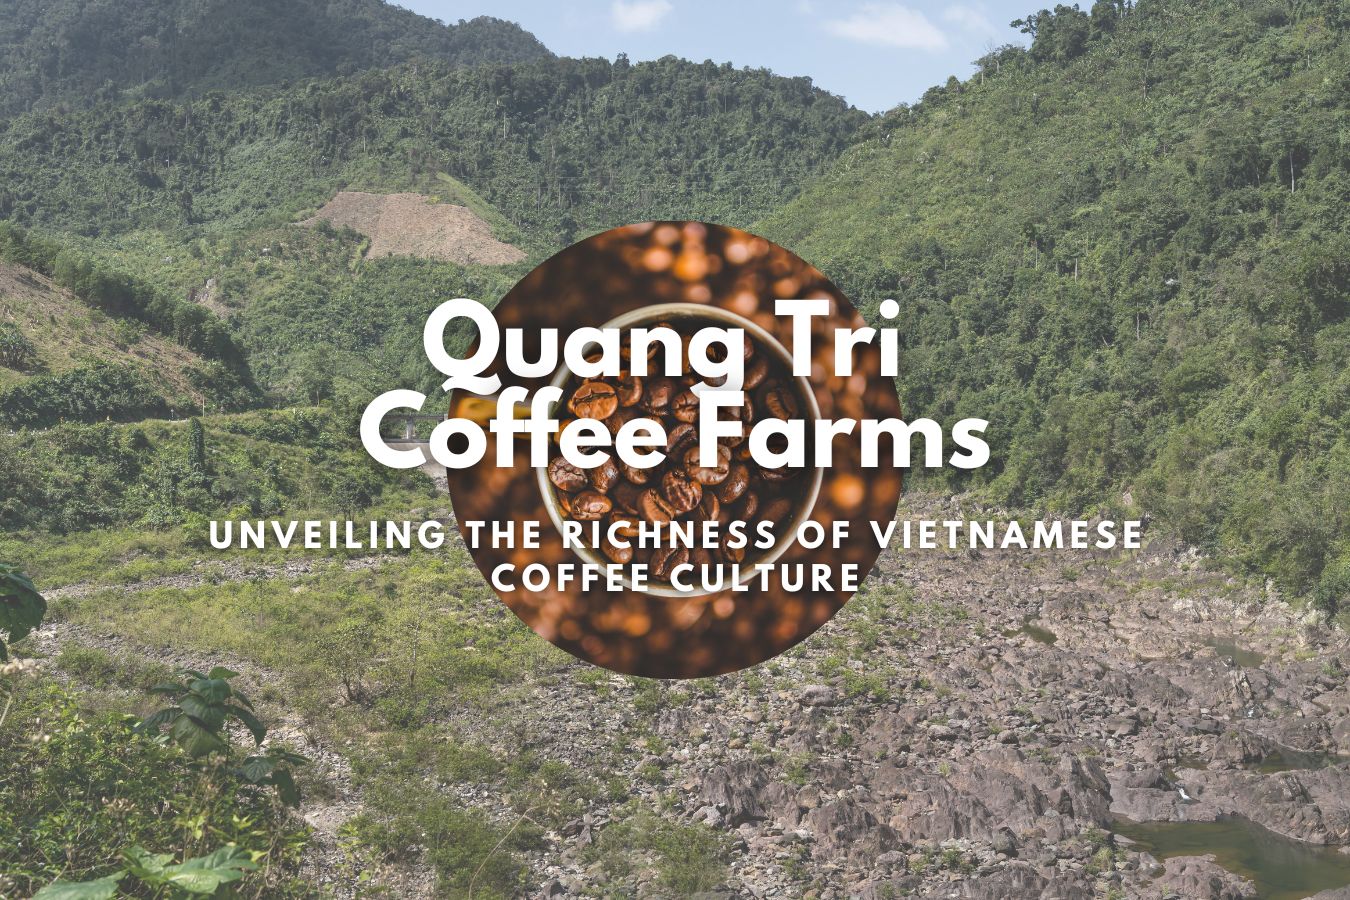 Quang Tri Coffee Farms: Unveiling the Richness of Vietnamese Coffee Culture